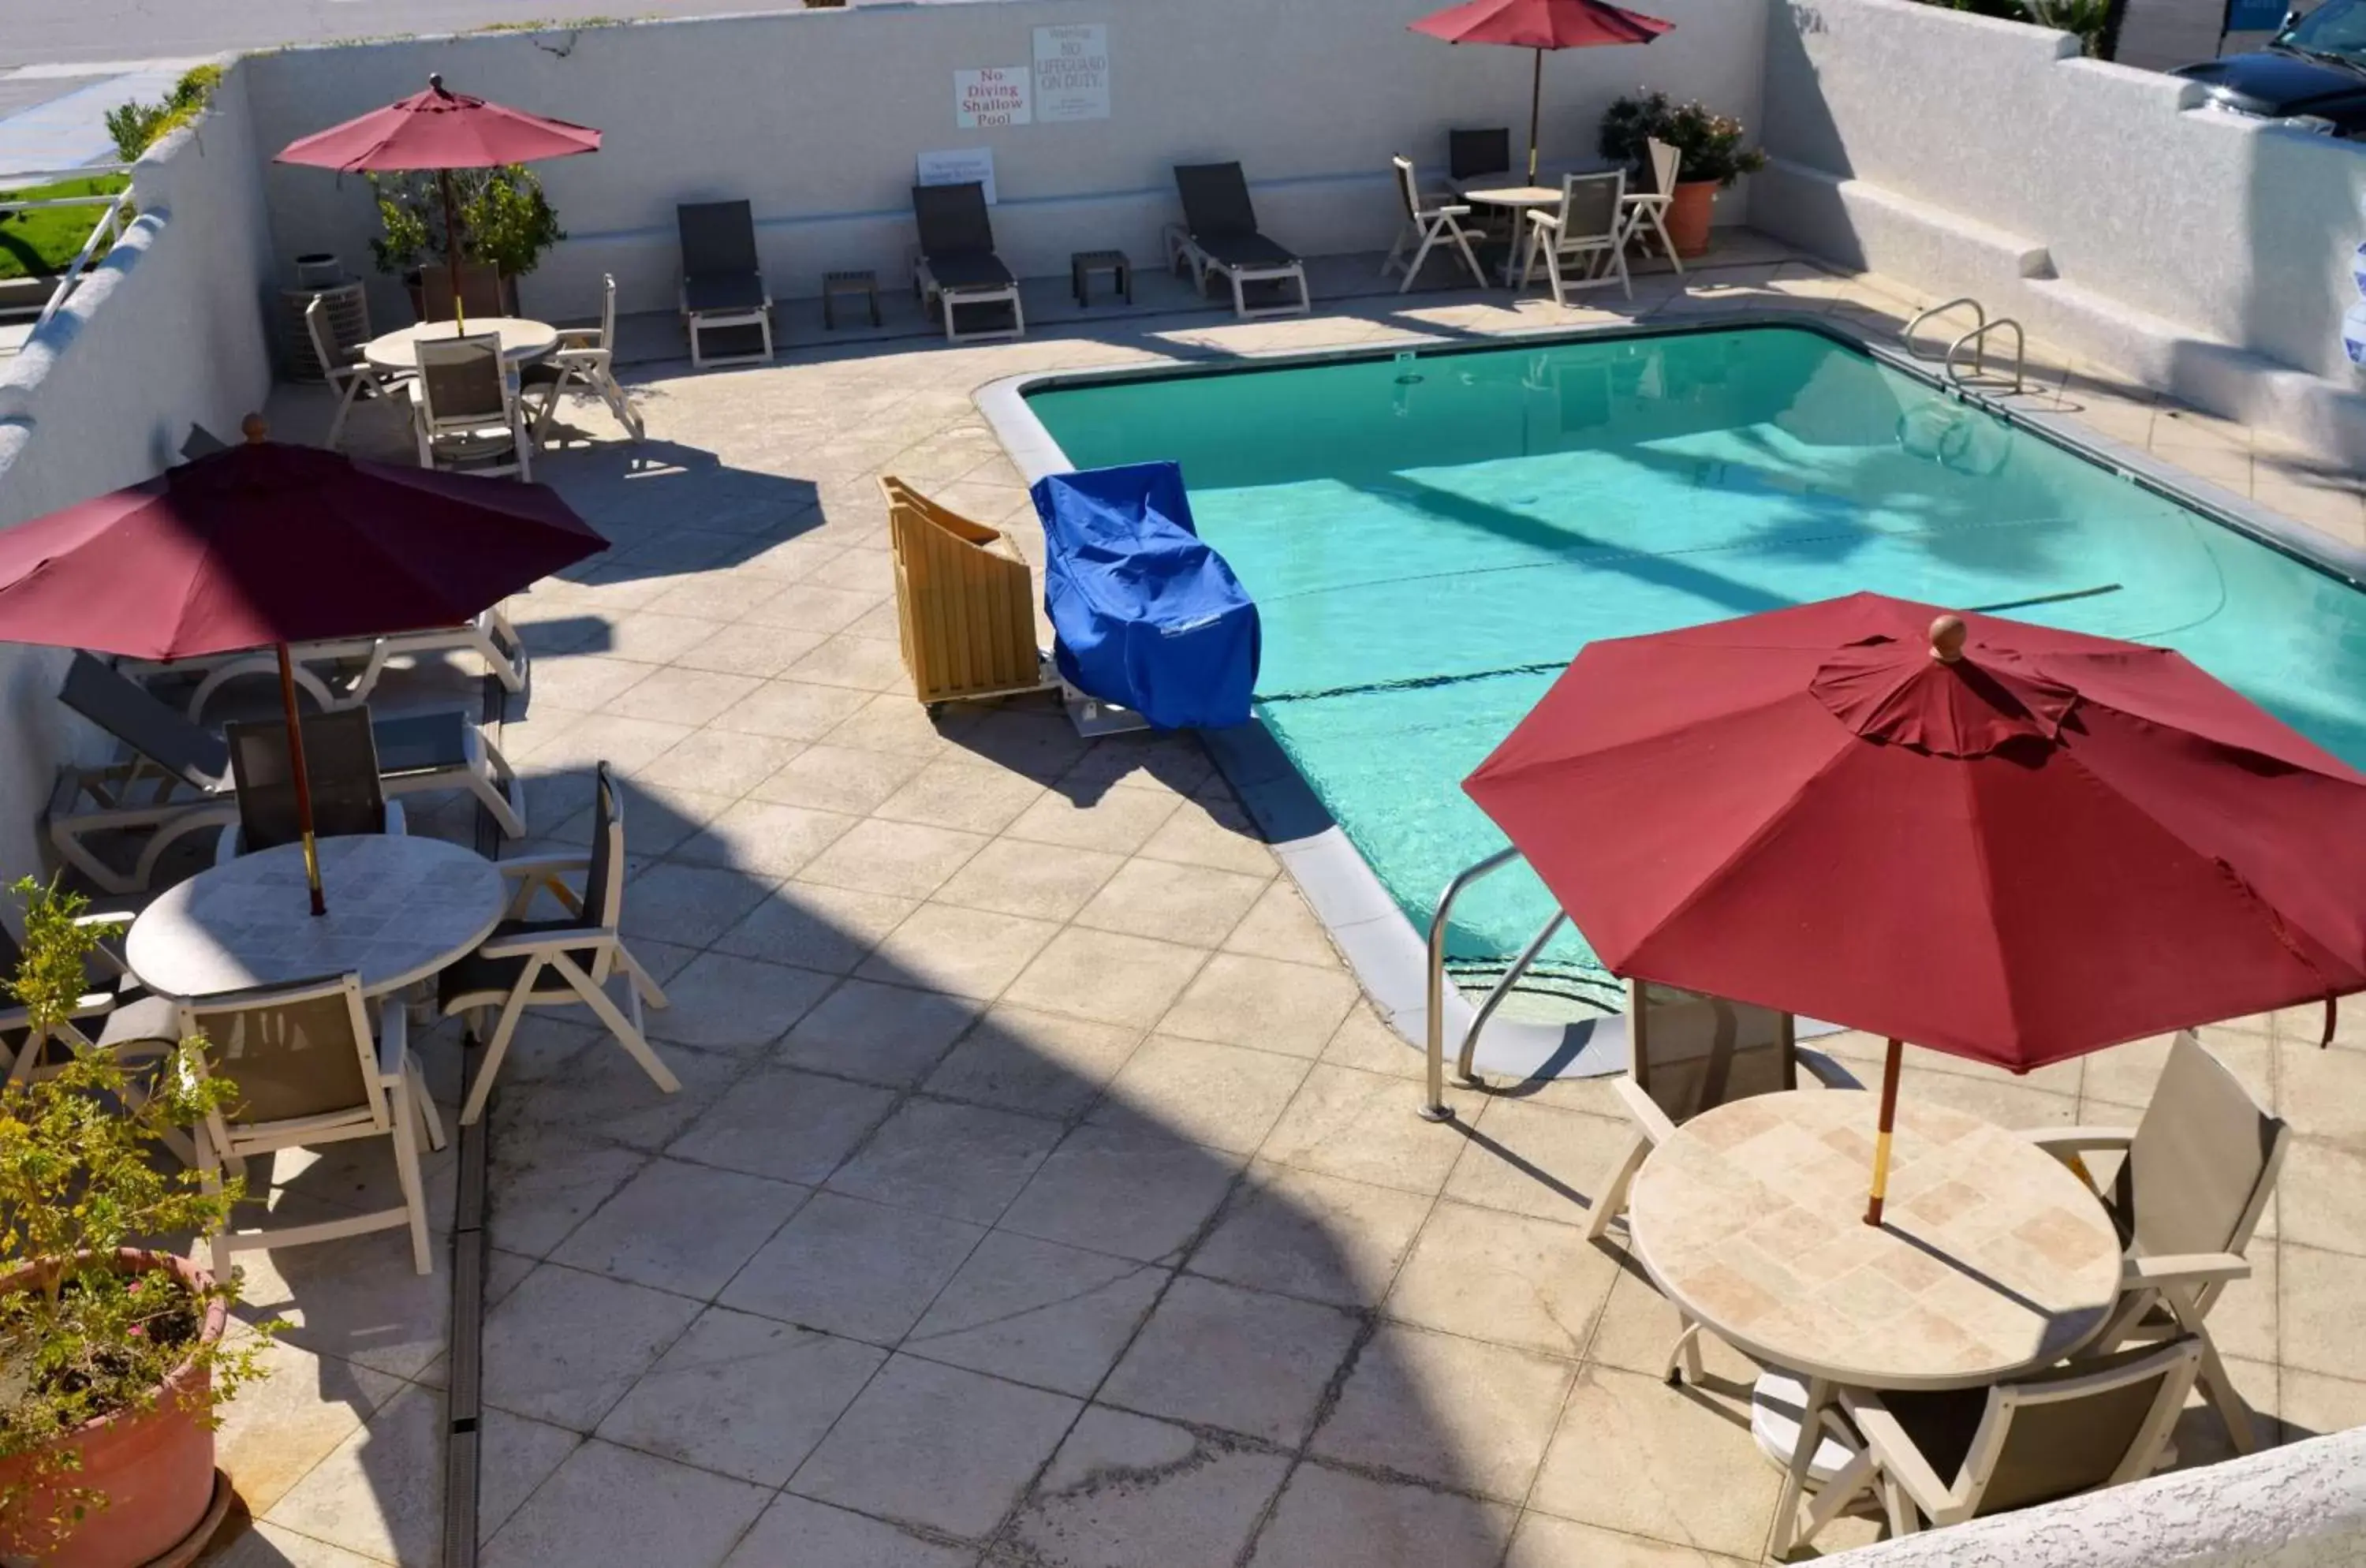 On site, Swimming Pool in Motel 6-Palm Desert, CA - Palm Springs Area